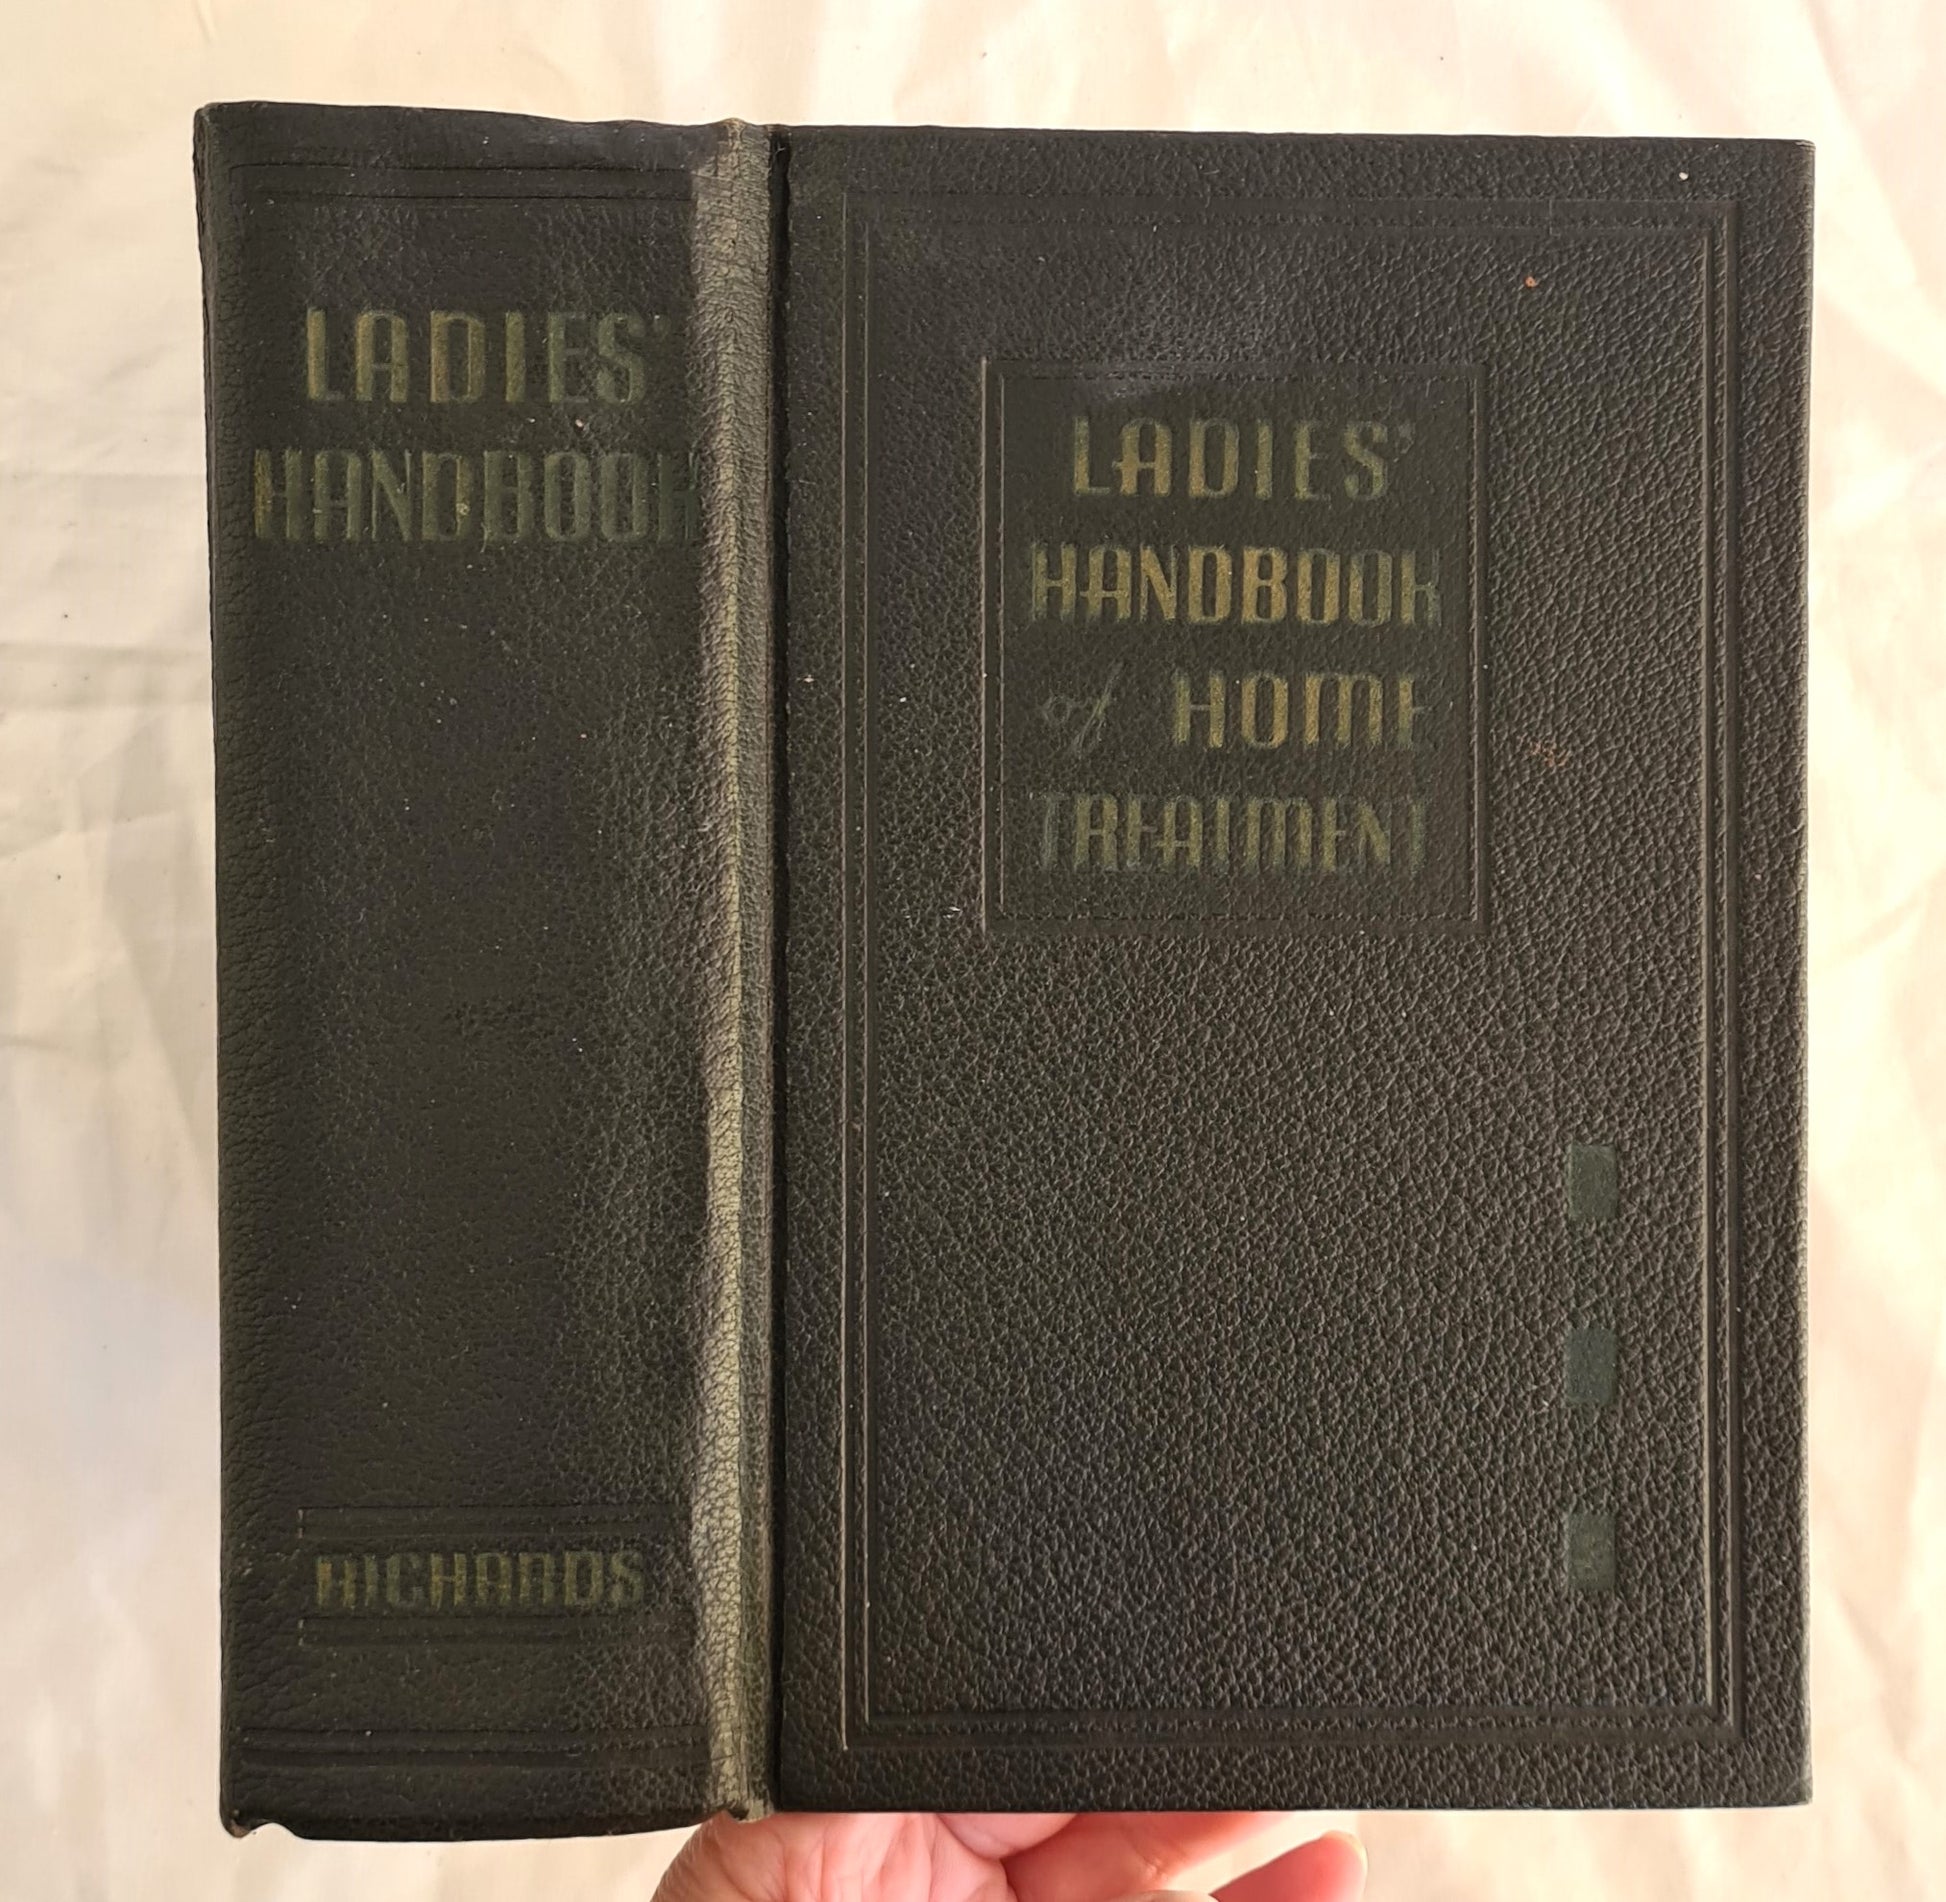 Ladie’s Handbook of Home Treatment  by Eulalia S. Richards